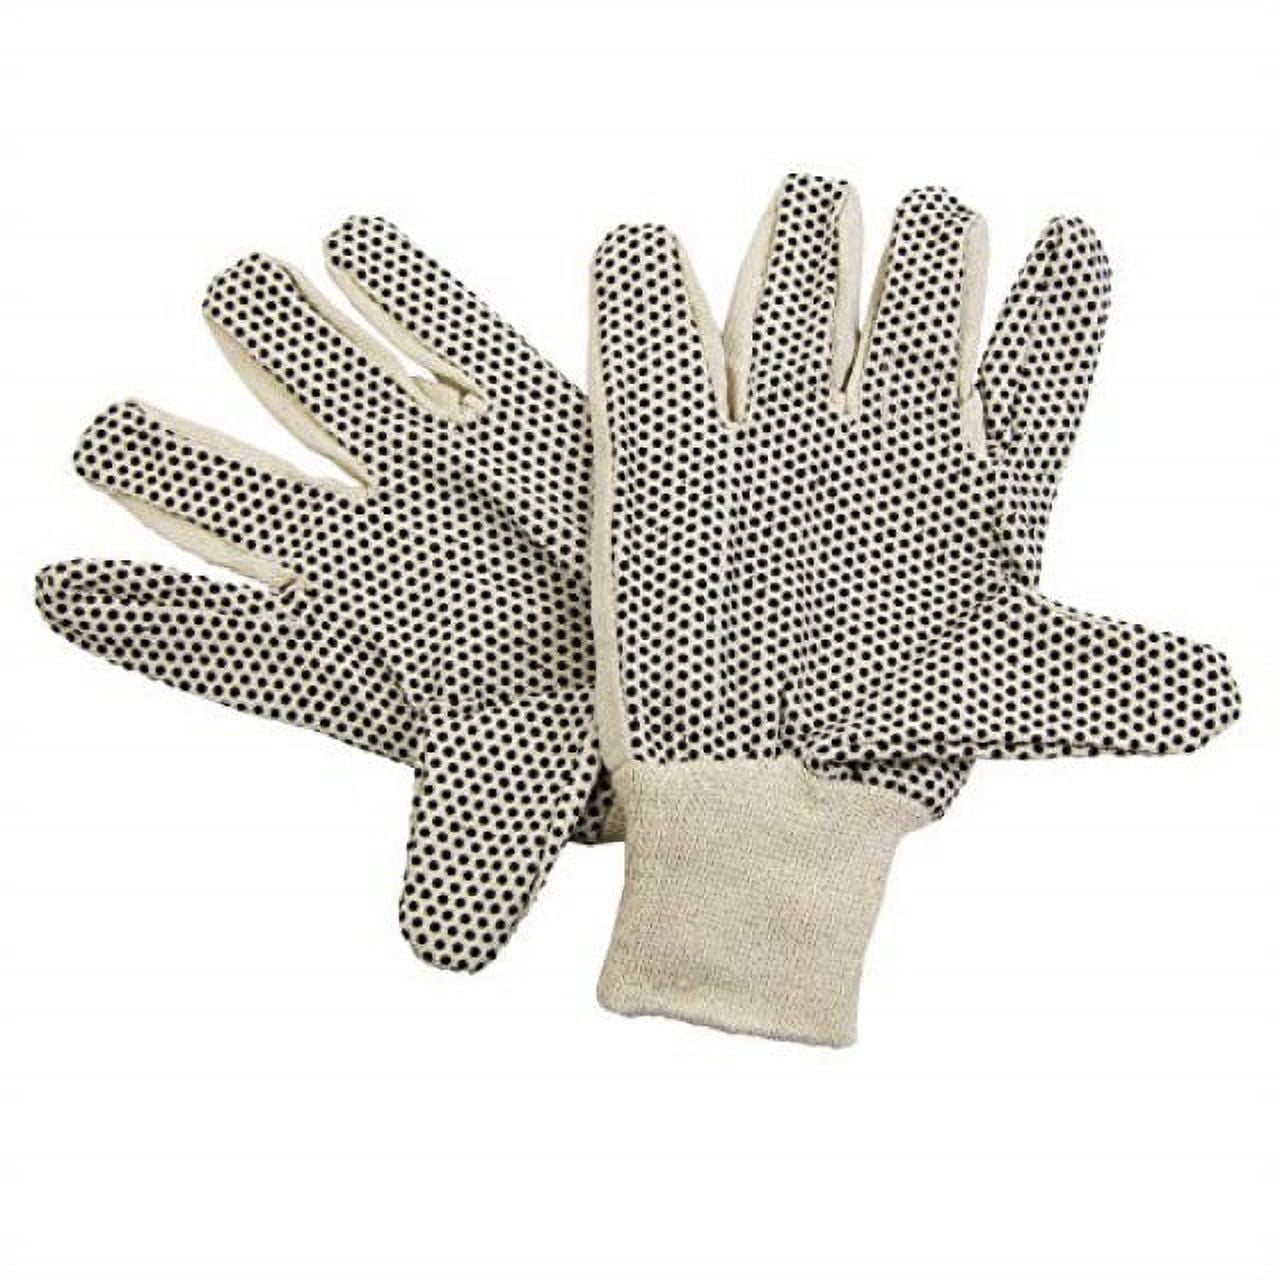 24pcs (12 Pairs) One Size Fit Most Comfortable Work Gloves, Black & White  Half Finger Thin Gloves For Hand Protection, Suitable For Gardening,  Handling Cargo, Etc.